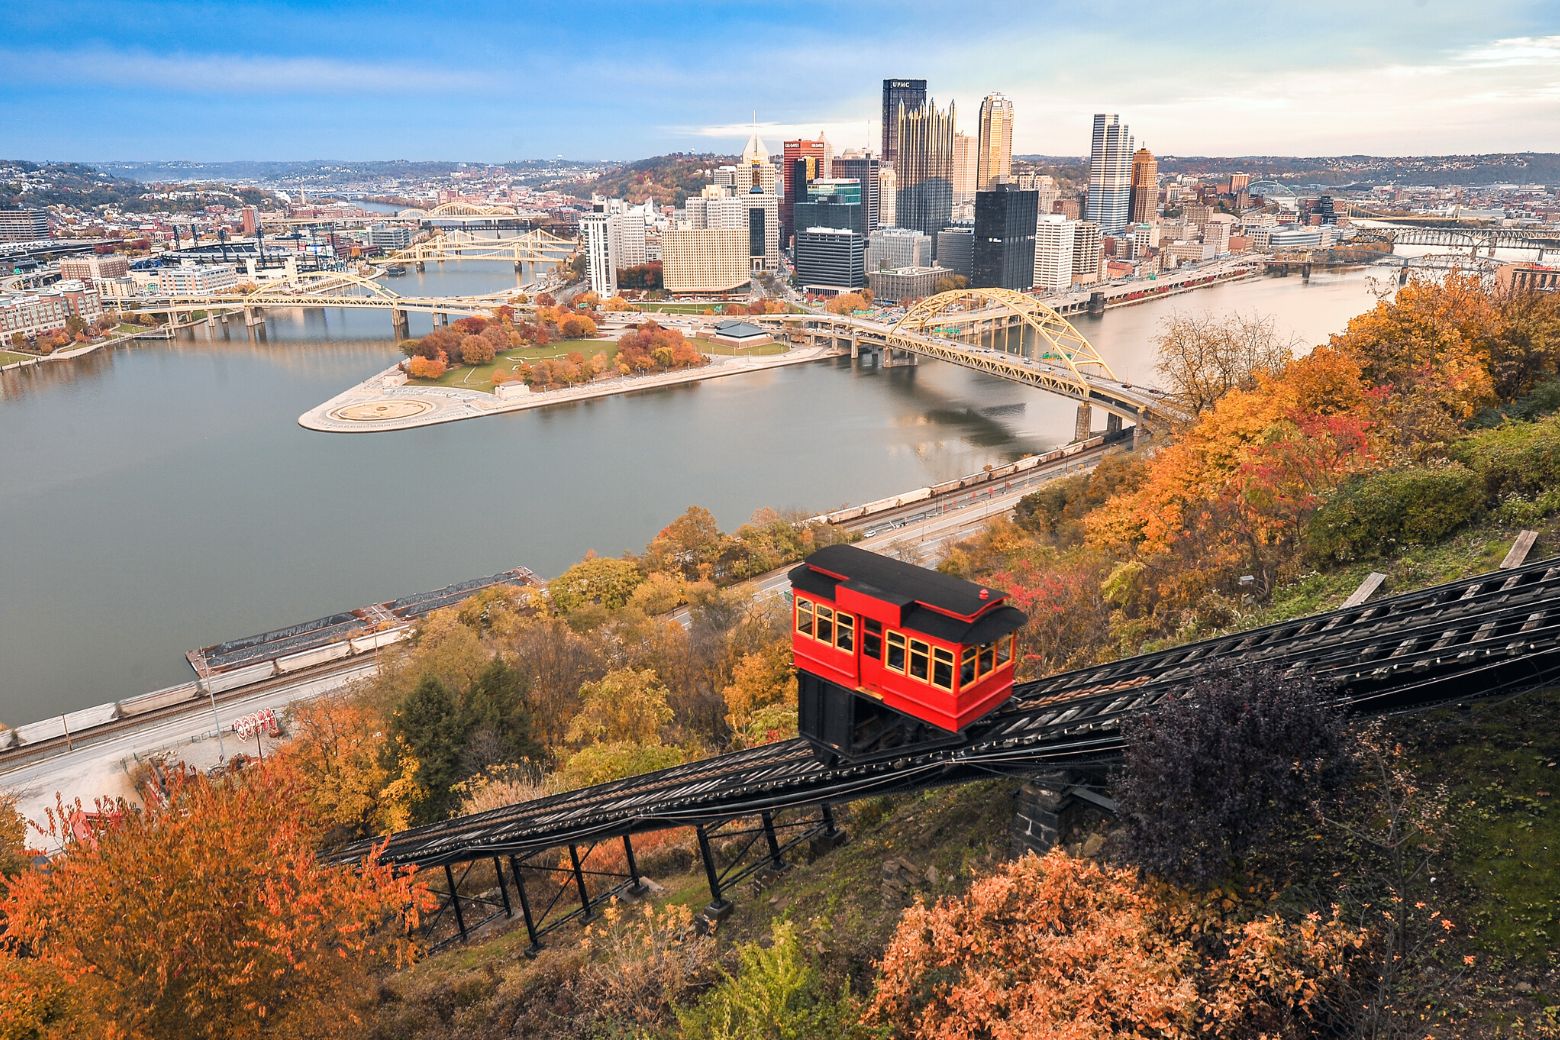 The Top 5 Pre-Listing Updates for Pittsburgh Homes